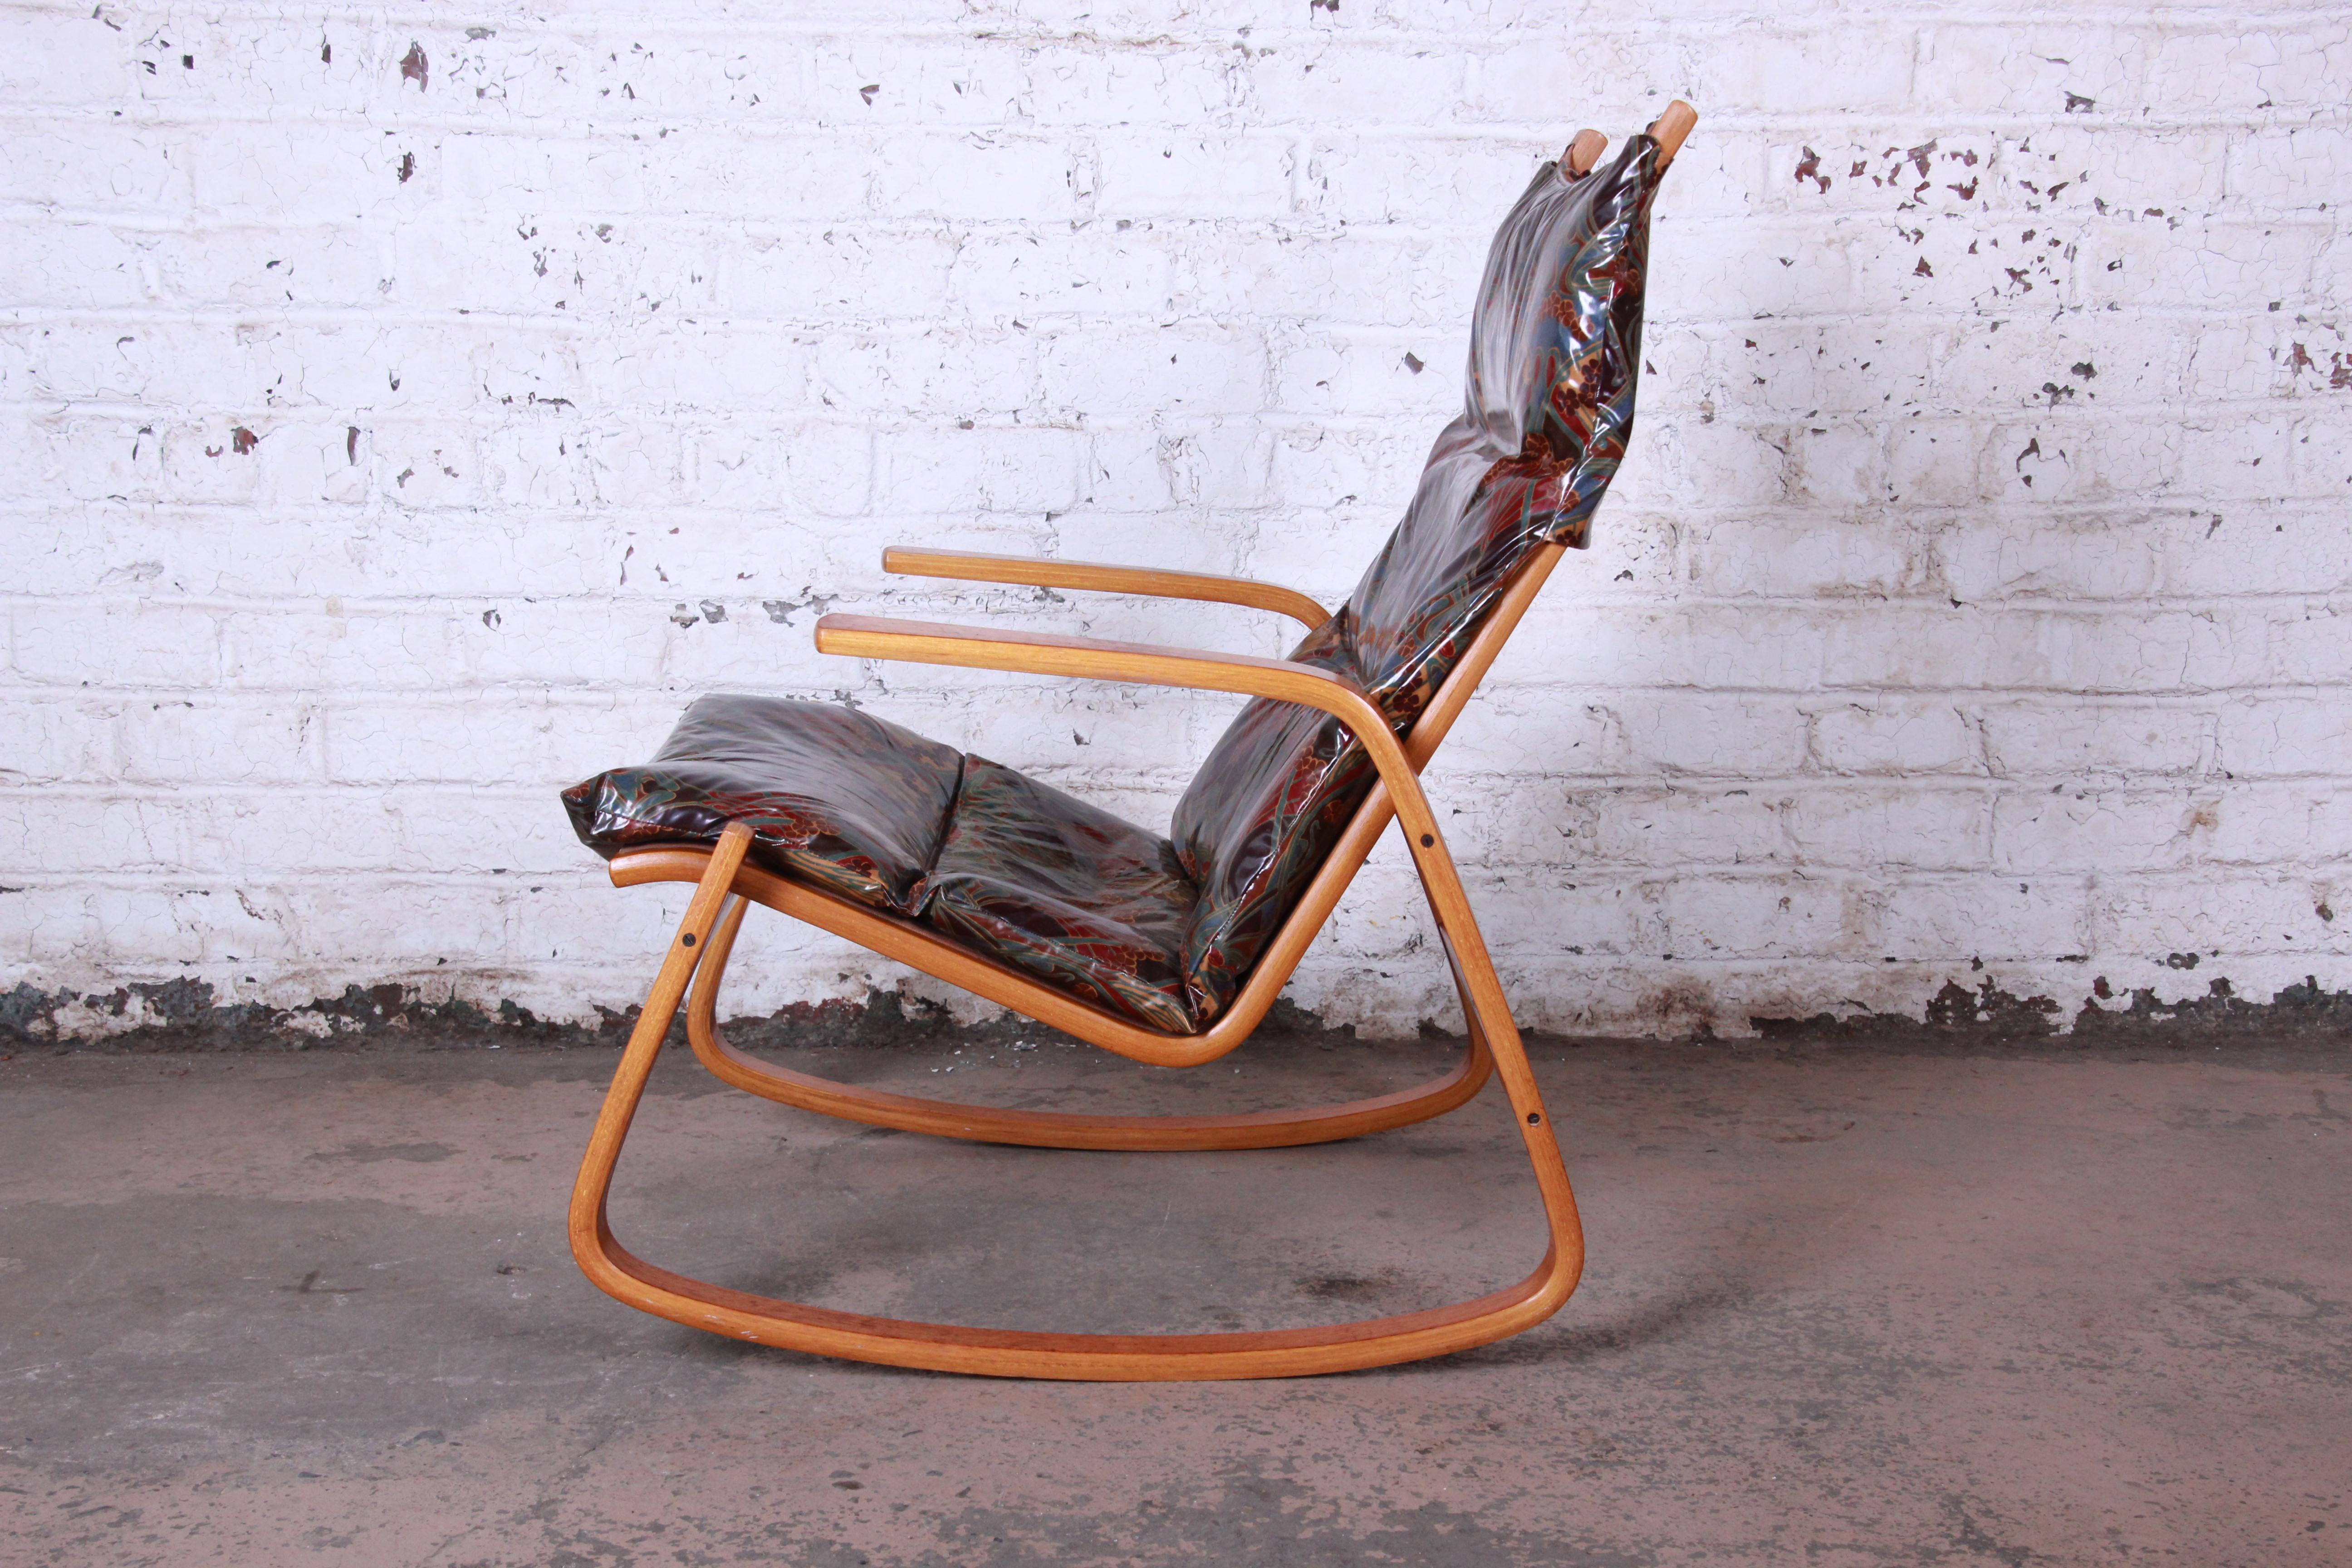 A stylish Scandinavian Modern teak rocking chair designed by Ingmar Relling for Westnofa. The chair features a solid teak bentwood frame and sleek Scandinavian design. It has the original paisley vinyl upholstery over canvas. Could be easily